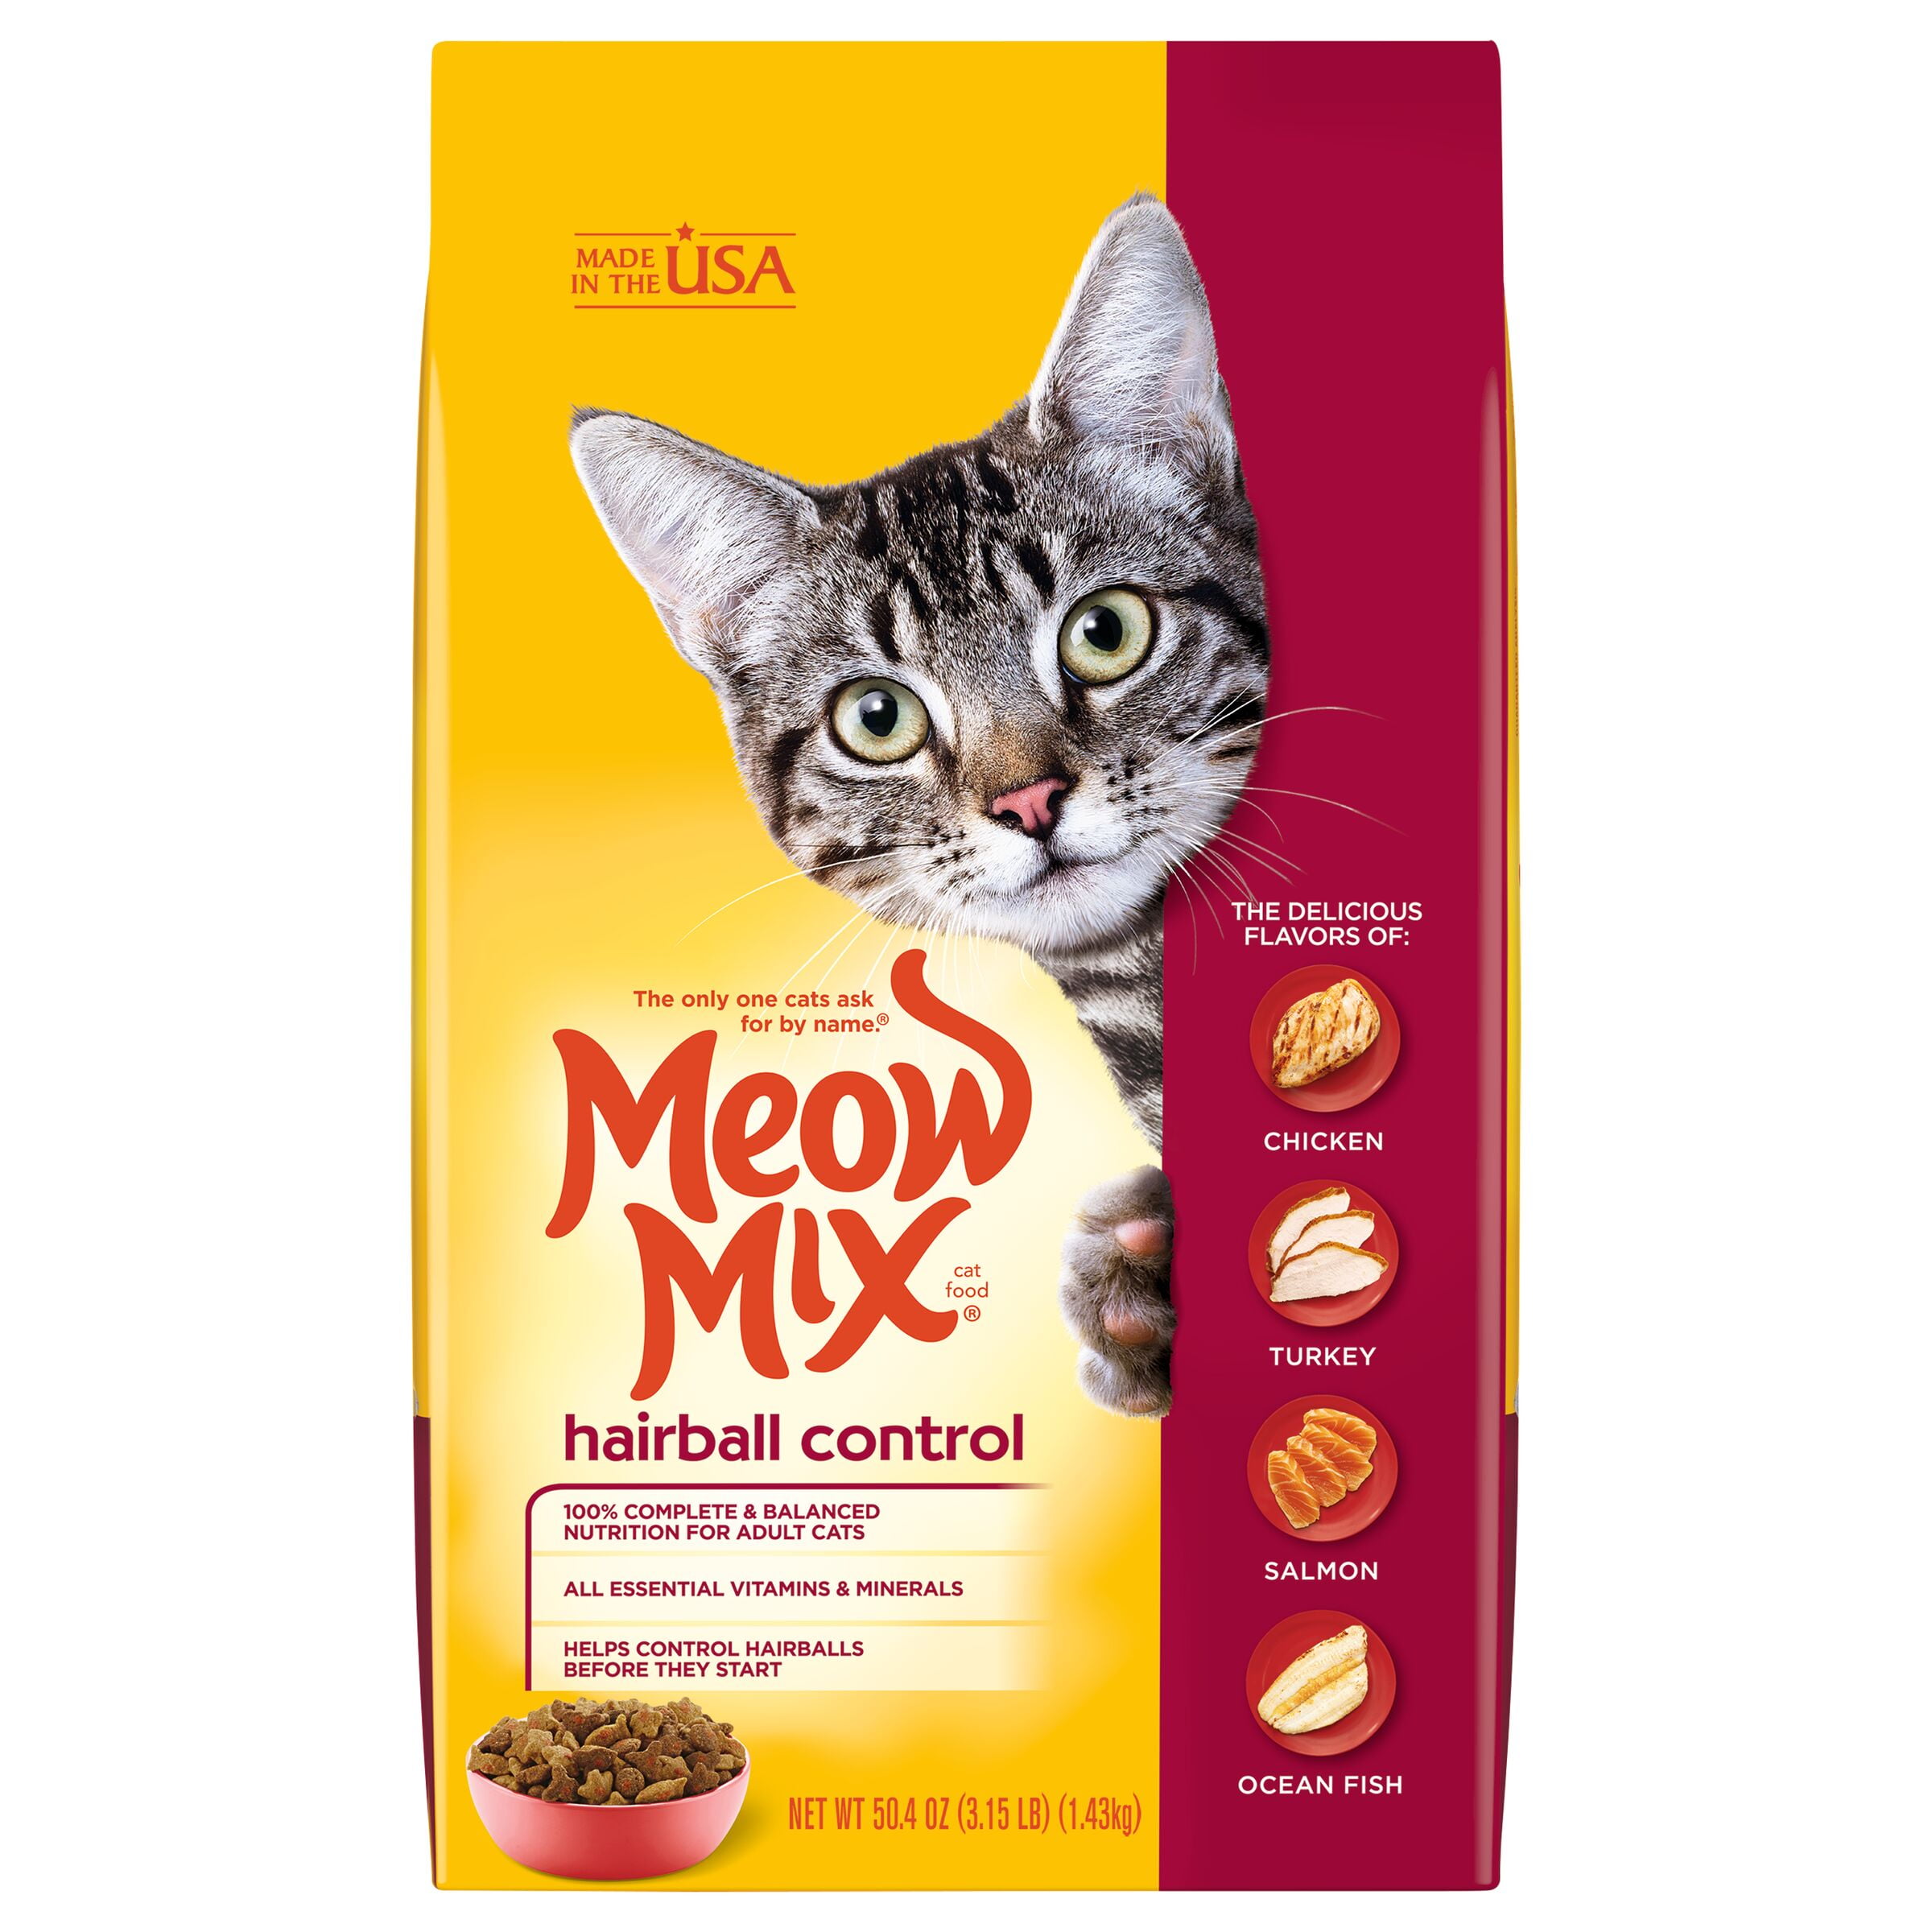 Meow Mix Hairball Control Dry Cat Food, 3.15Pound Bag